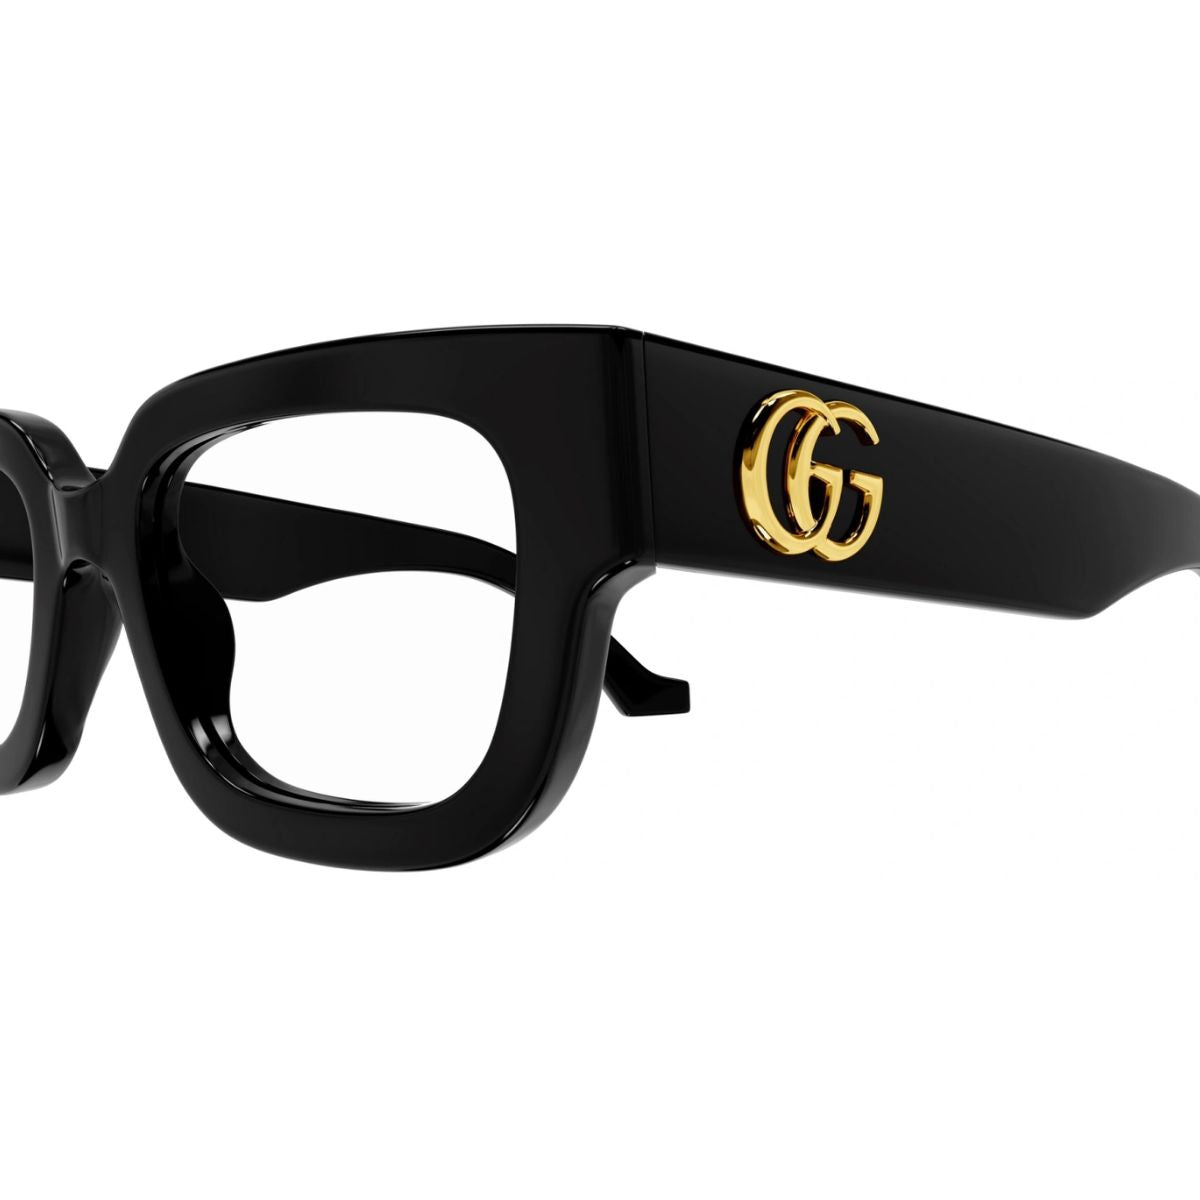 "Premium Gucci Eyewear - Model 1548O 001 frames offering timeless style and exceptional quality."